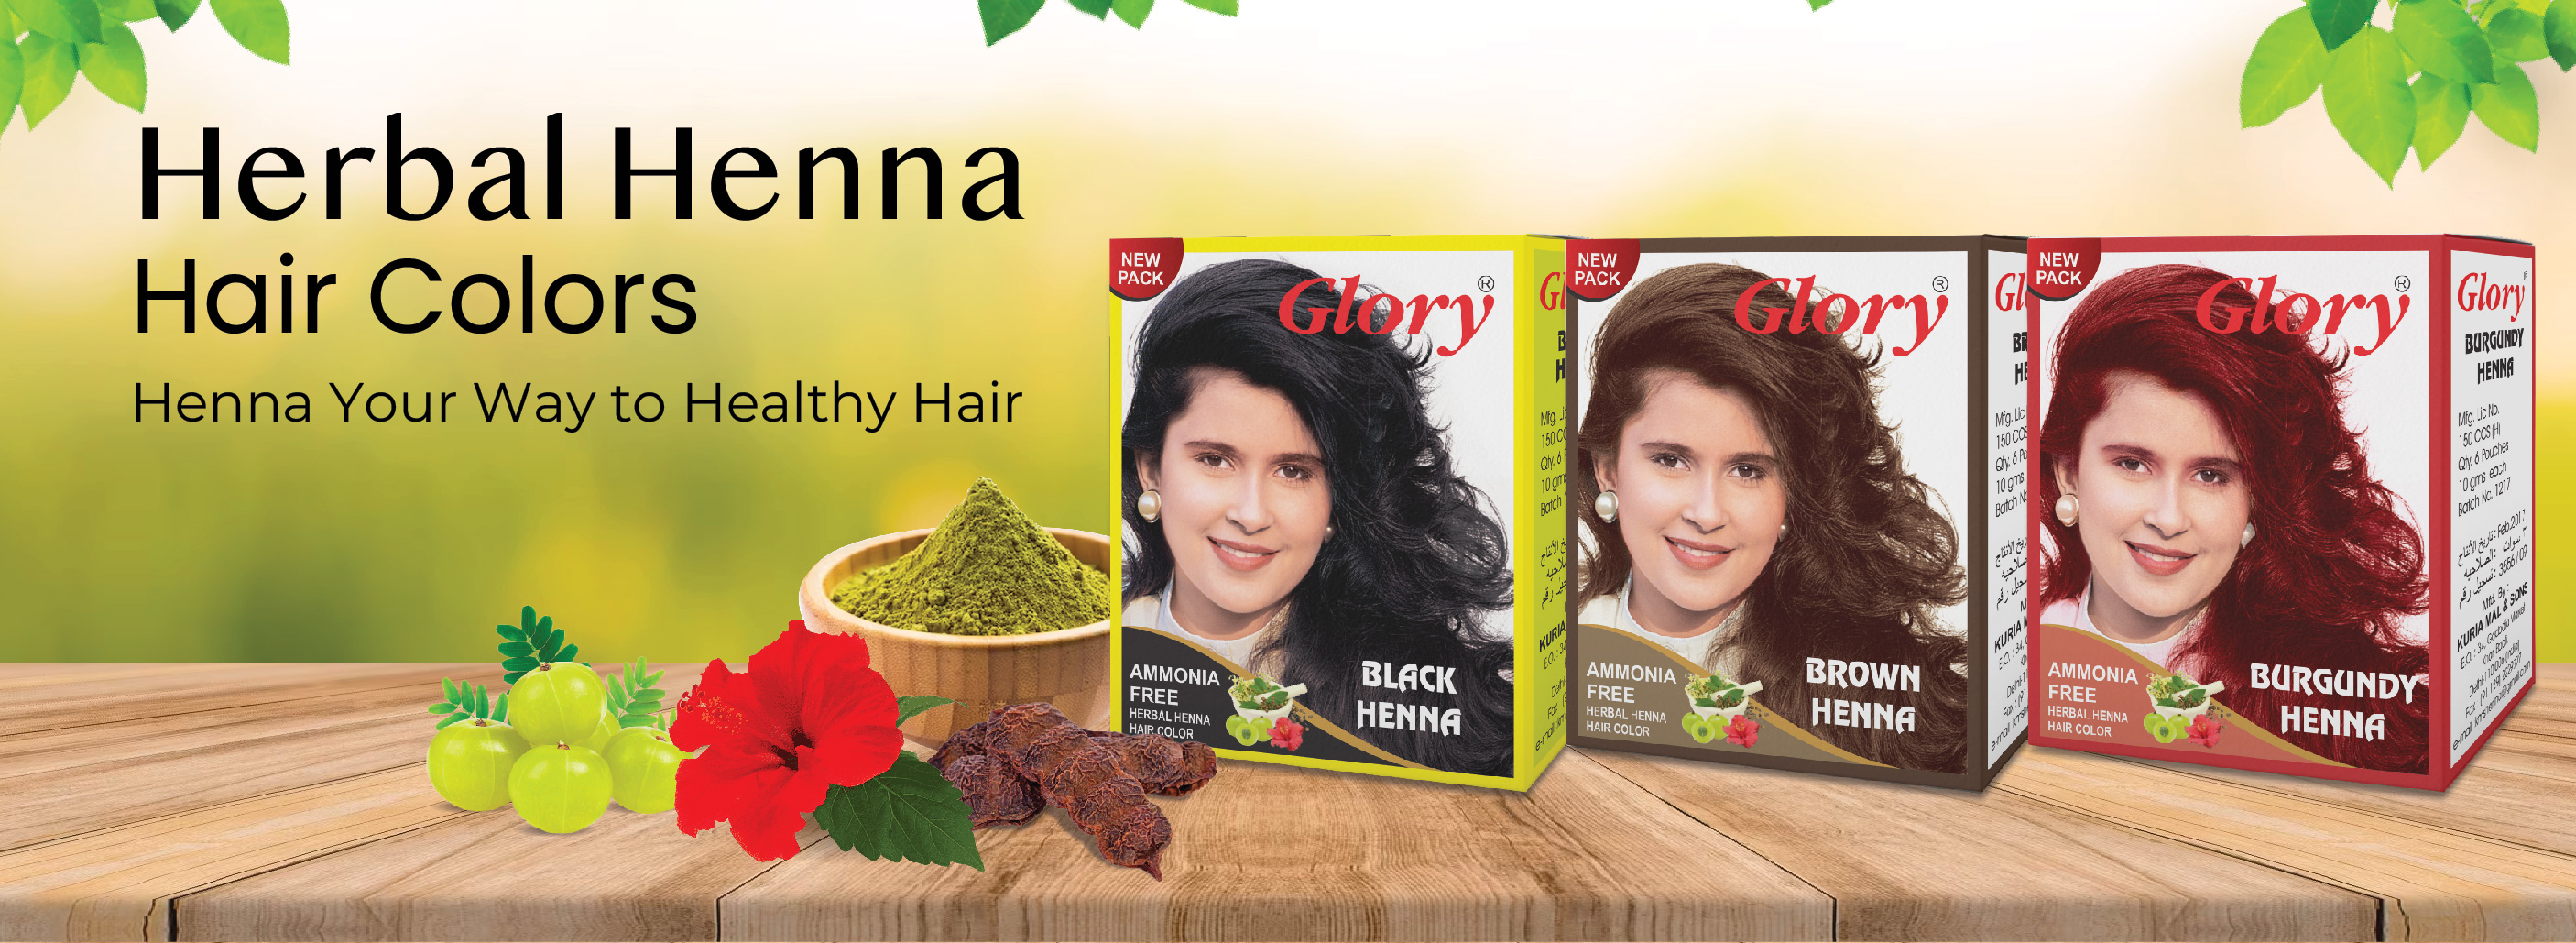 Henna Hair Color Manufacturer | Henna Hair Color Manufacturer in Indonesia